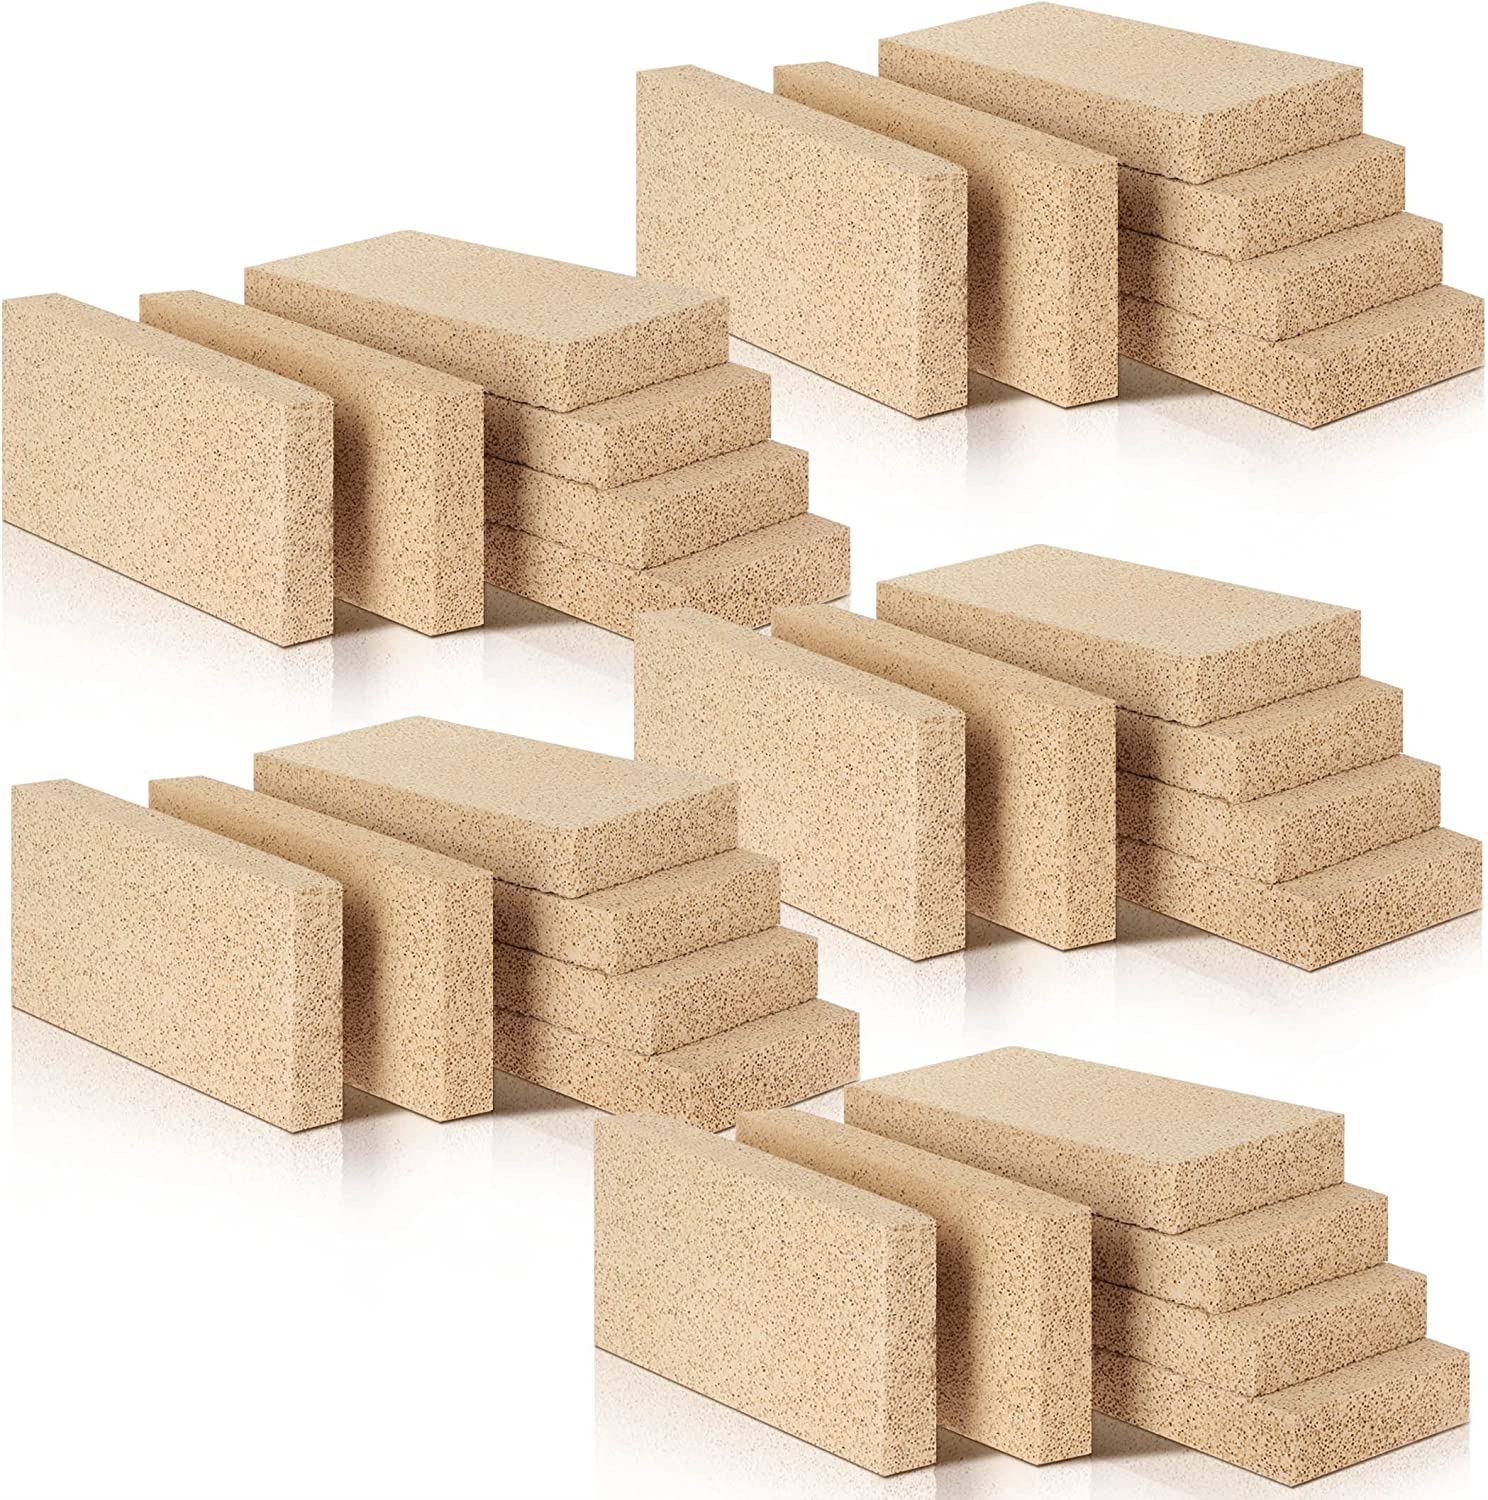 Fire Bricks, Woodstove Firebricks, Size 9″ x 4-1/2″ x 2-1/2″, 2-Pack,  Insulating Fire Bricks, 2.5 Thick Clay Firebricks Replacement for Wood  Stoves